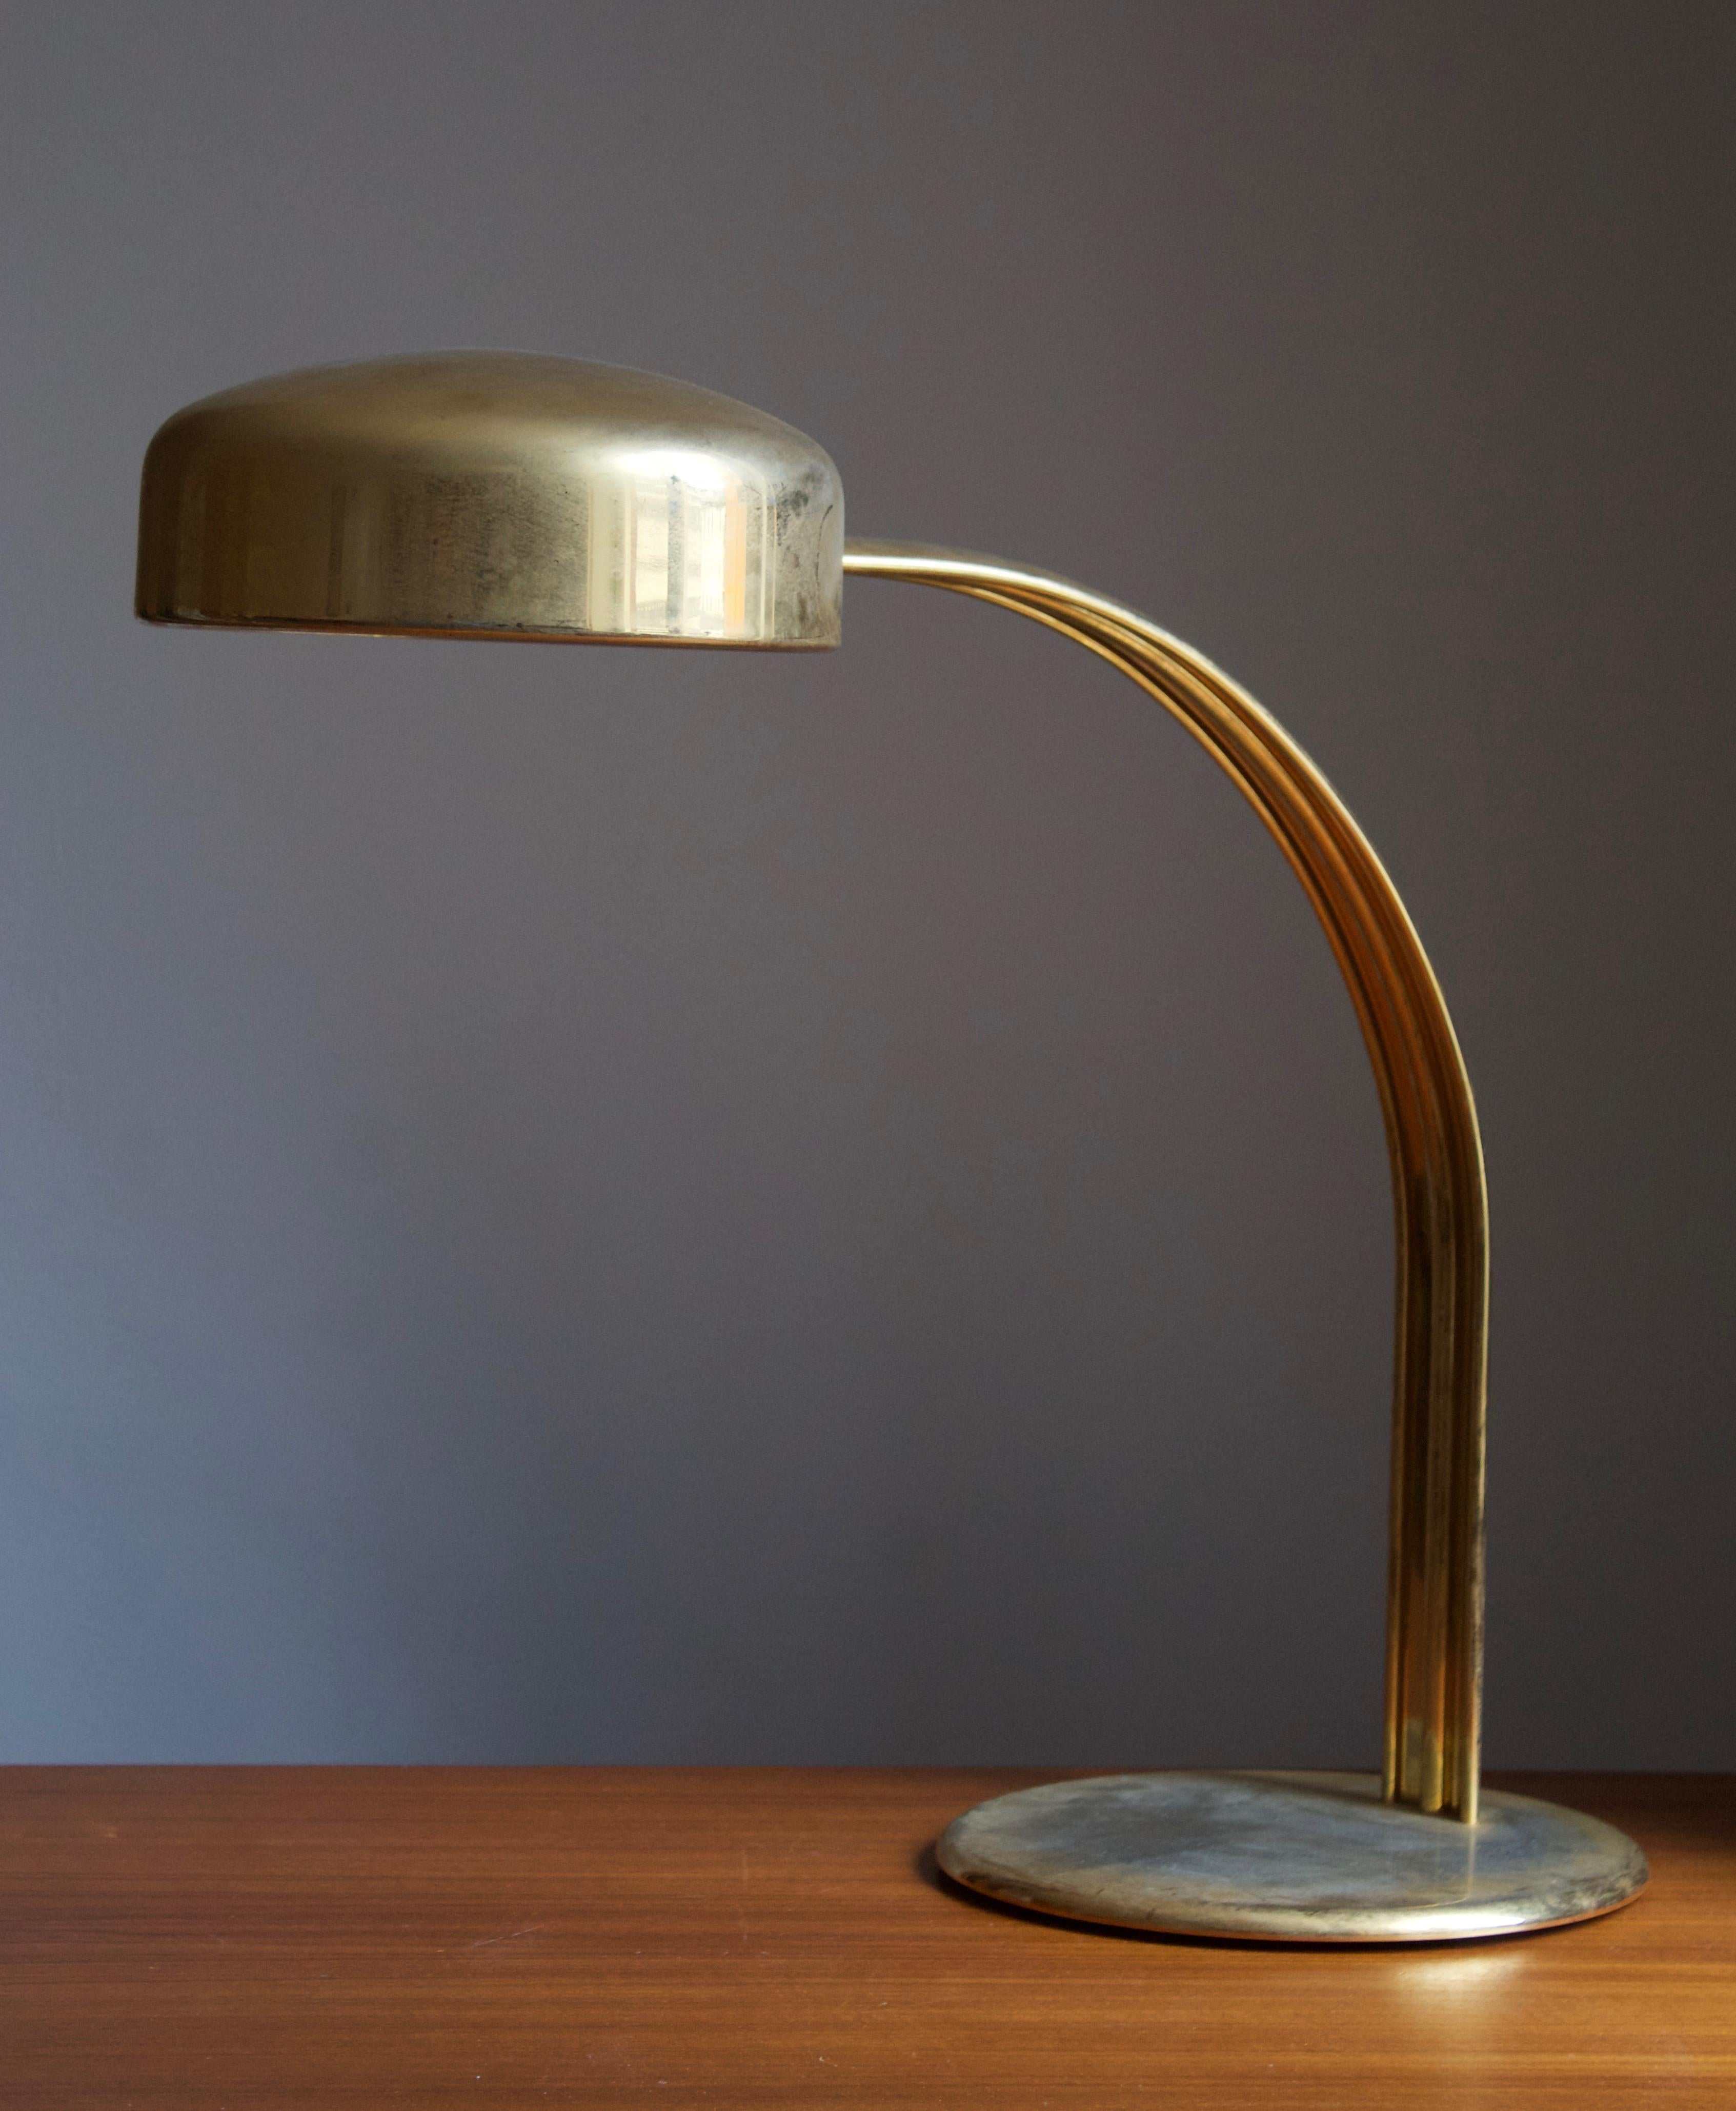 A sizable table lamp, designed by Richard Carruthers for Atelje Lyktan, Sweden, 1960s.

In brass.